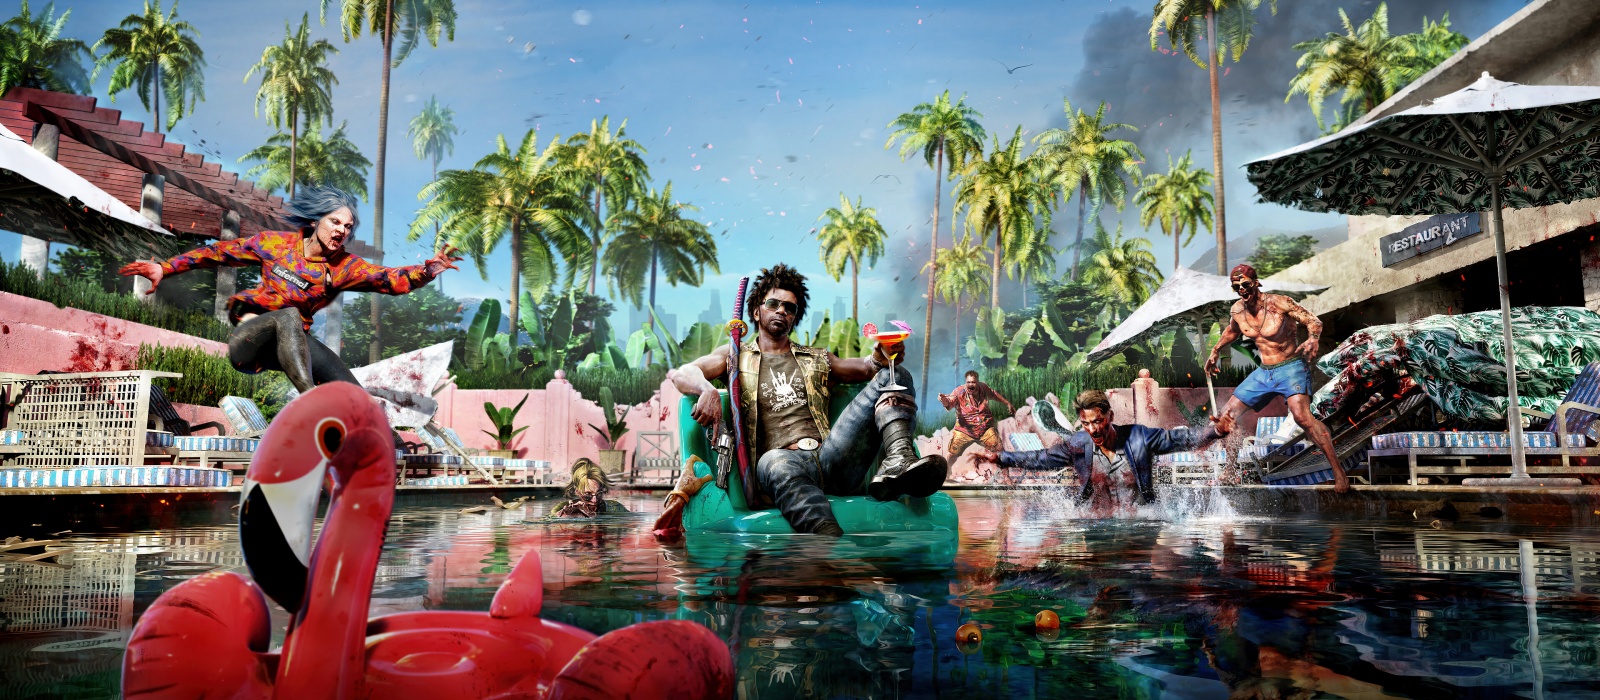 Dead Island 2 co-op guide - how to play with friends and is it possible to go through the story in co-op mode